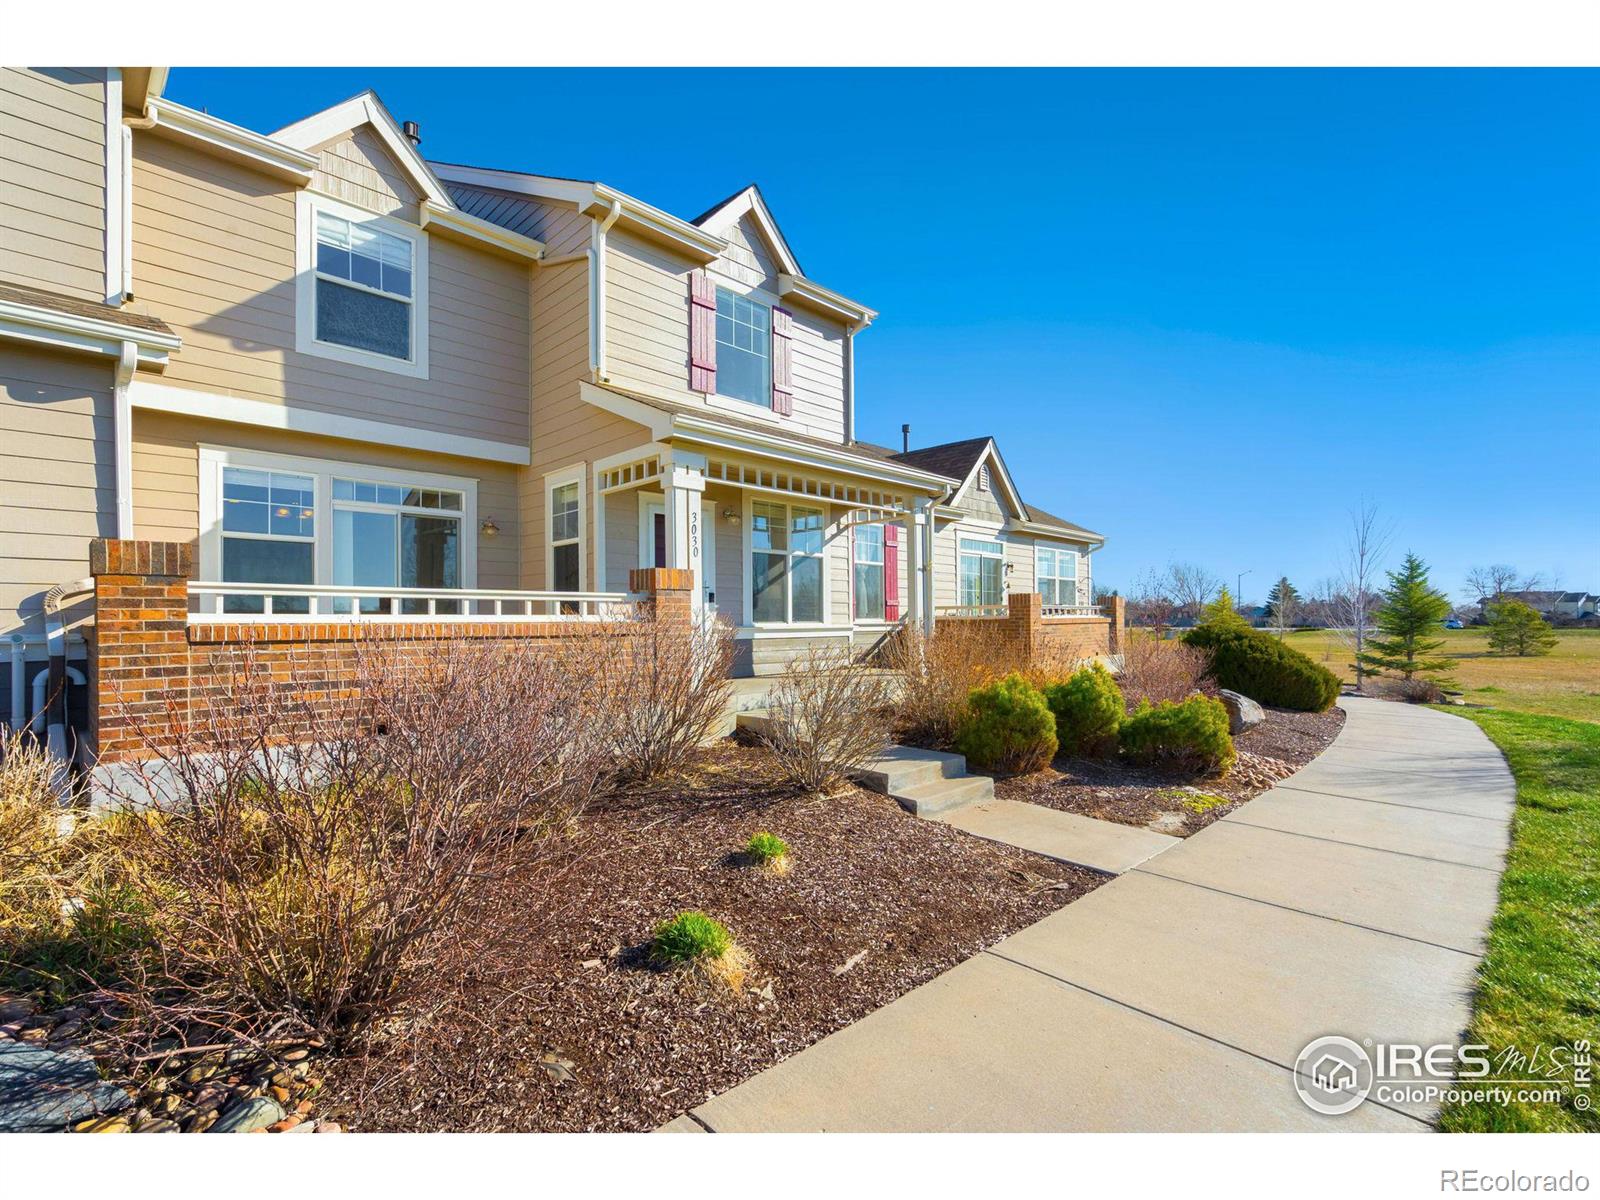 3030  nunn place, Loveland sold home. Closed on 2024-05-17 for $430,000.